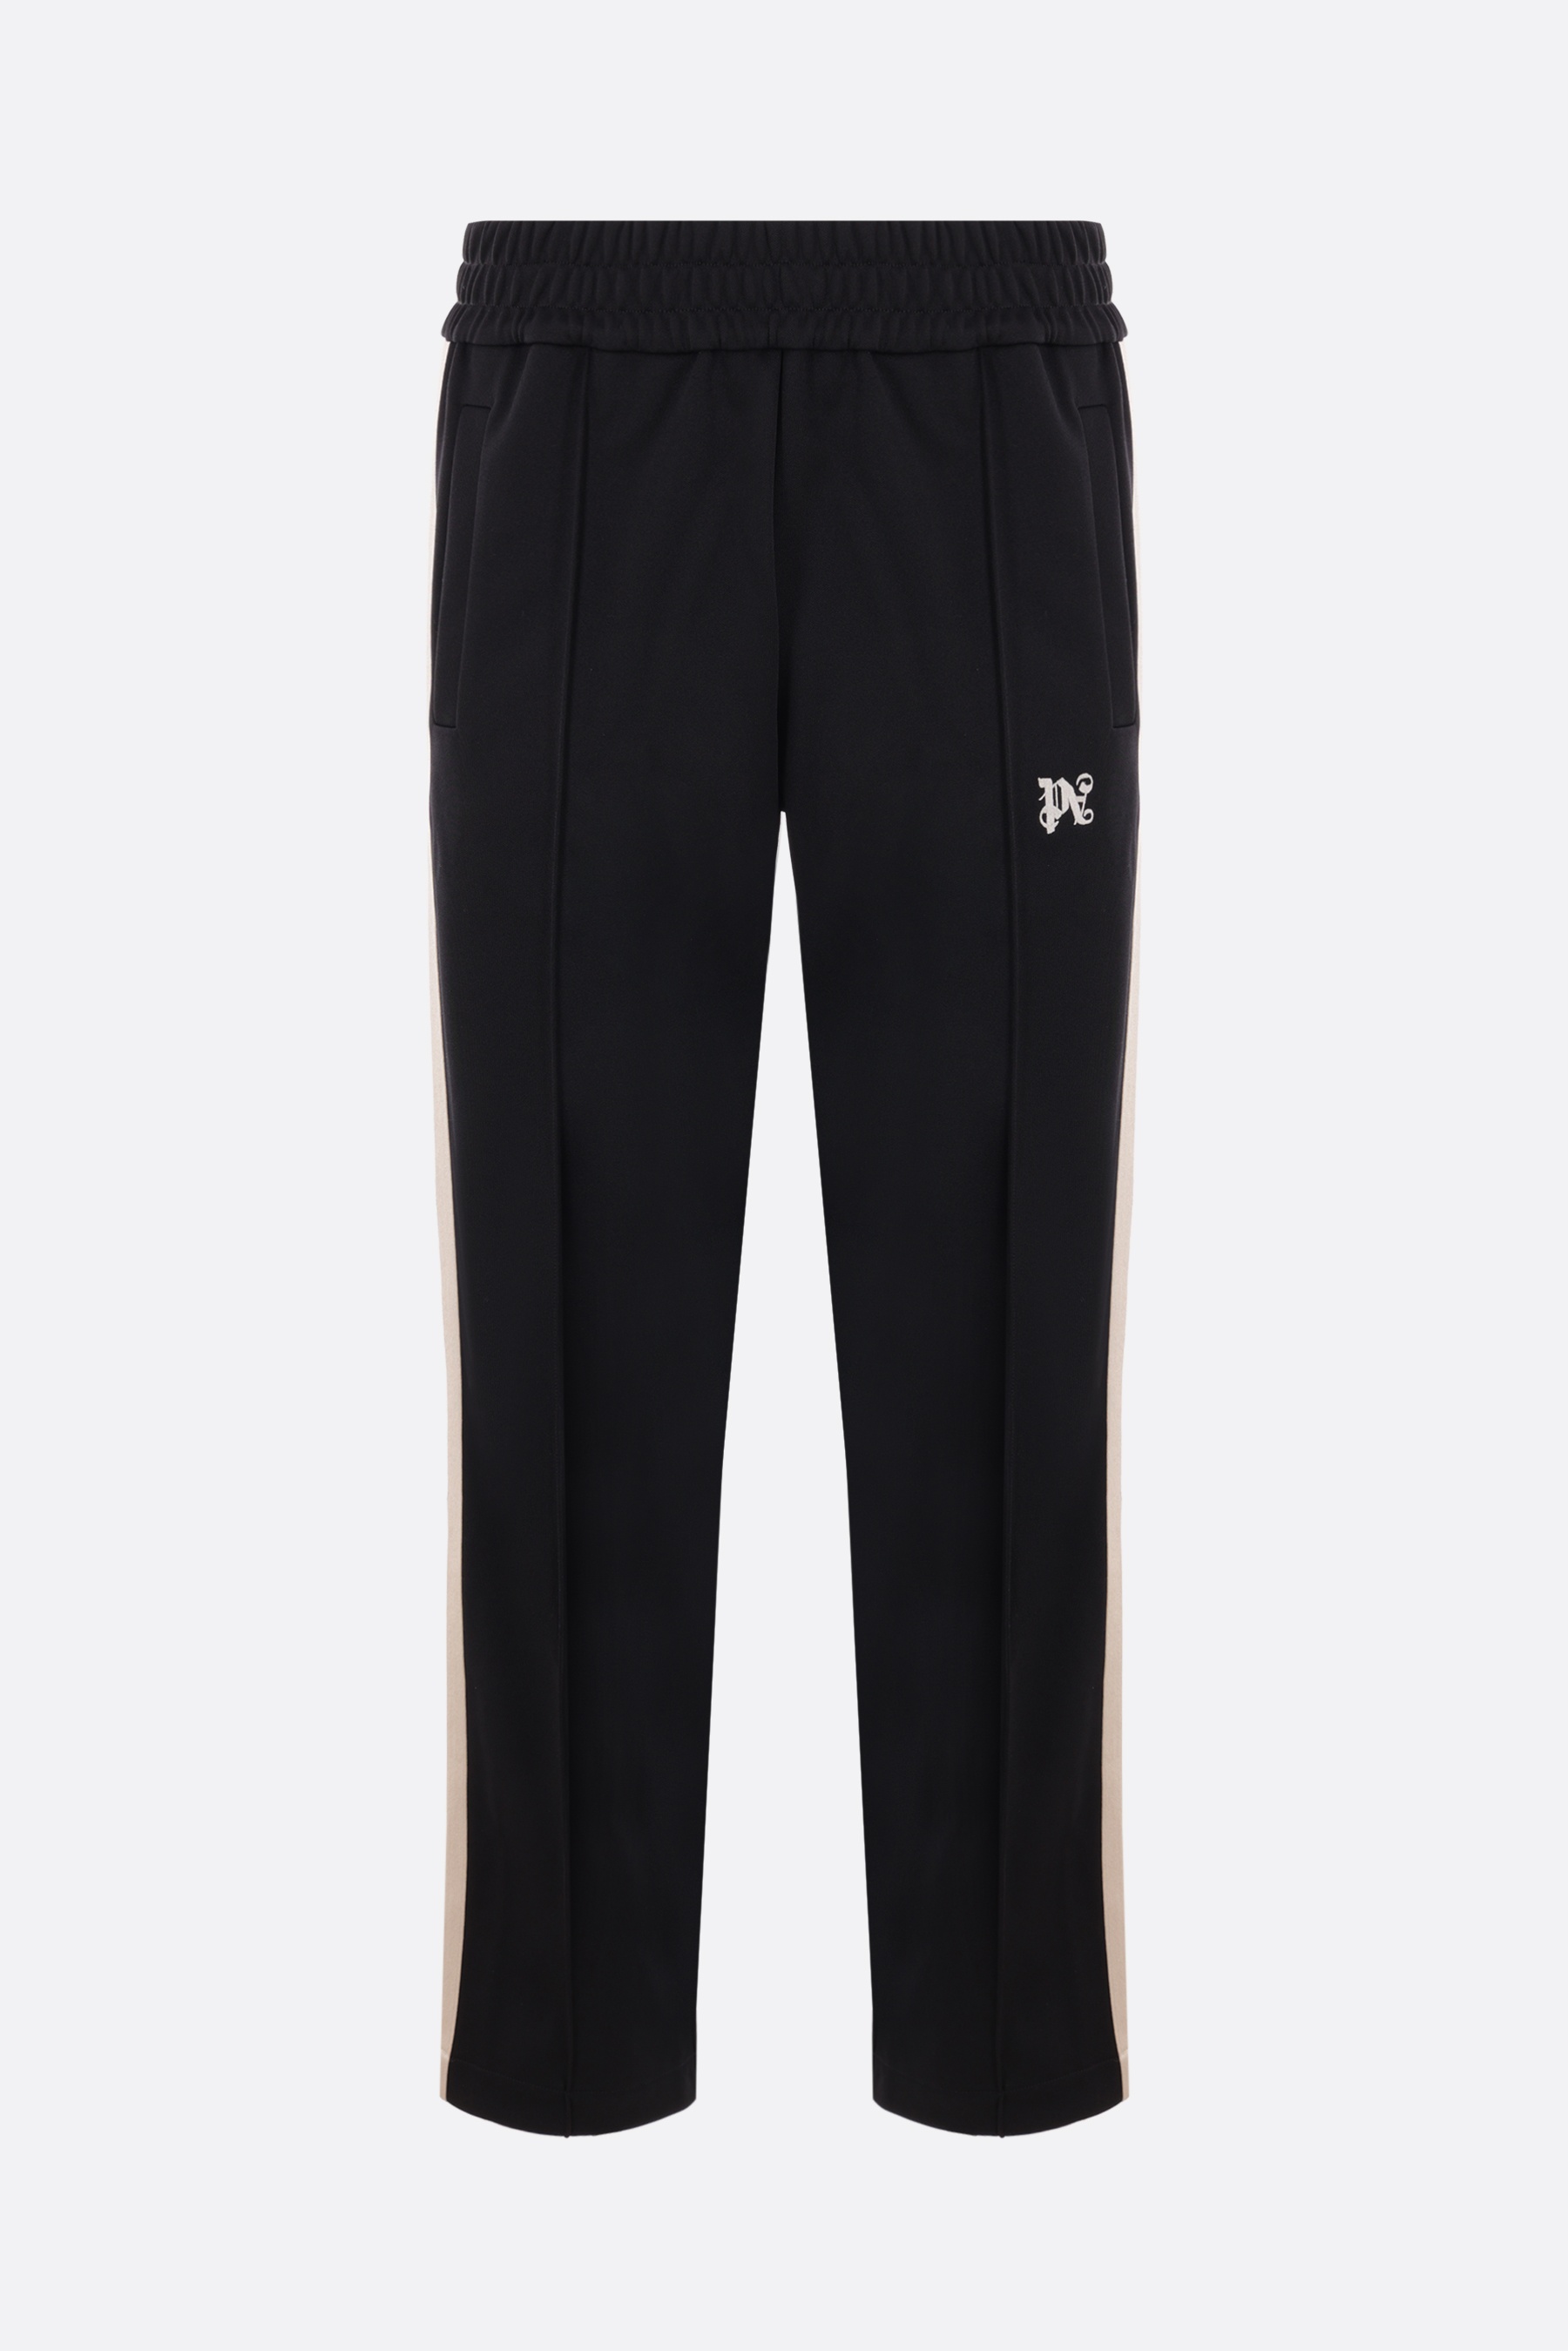 TECHNICAL JERSEY TRACKSUIT PANTS WITH MONOGRAM LOGO - 1